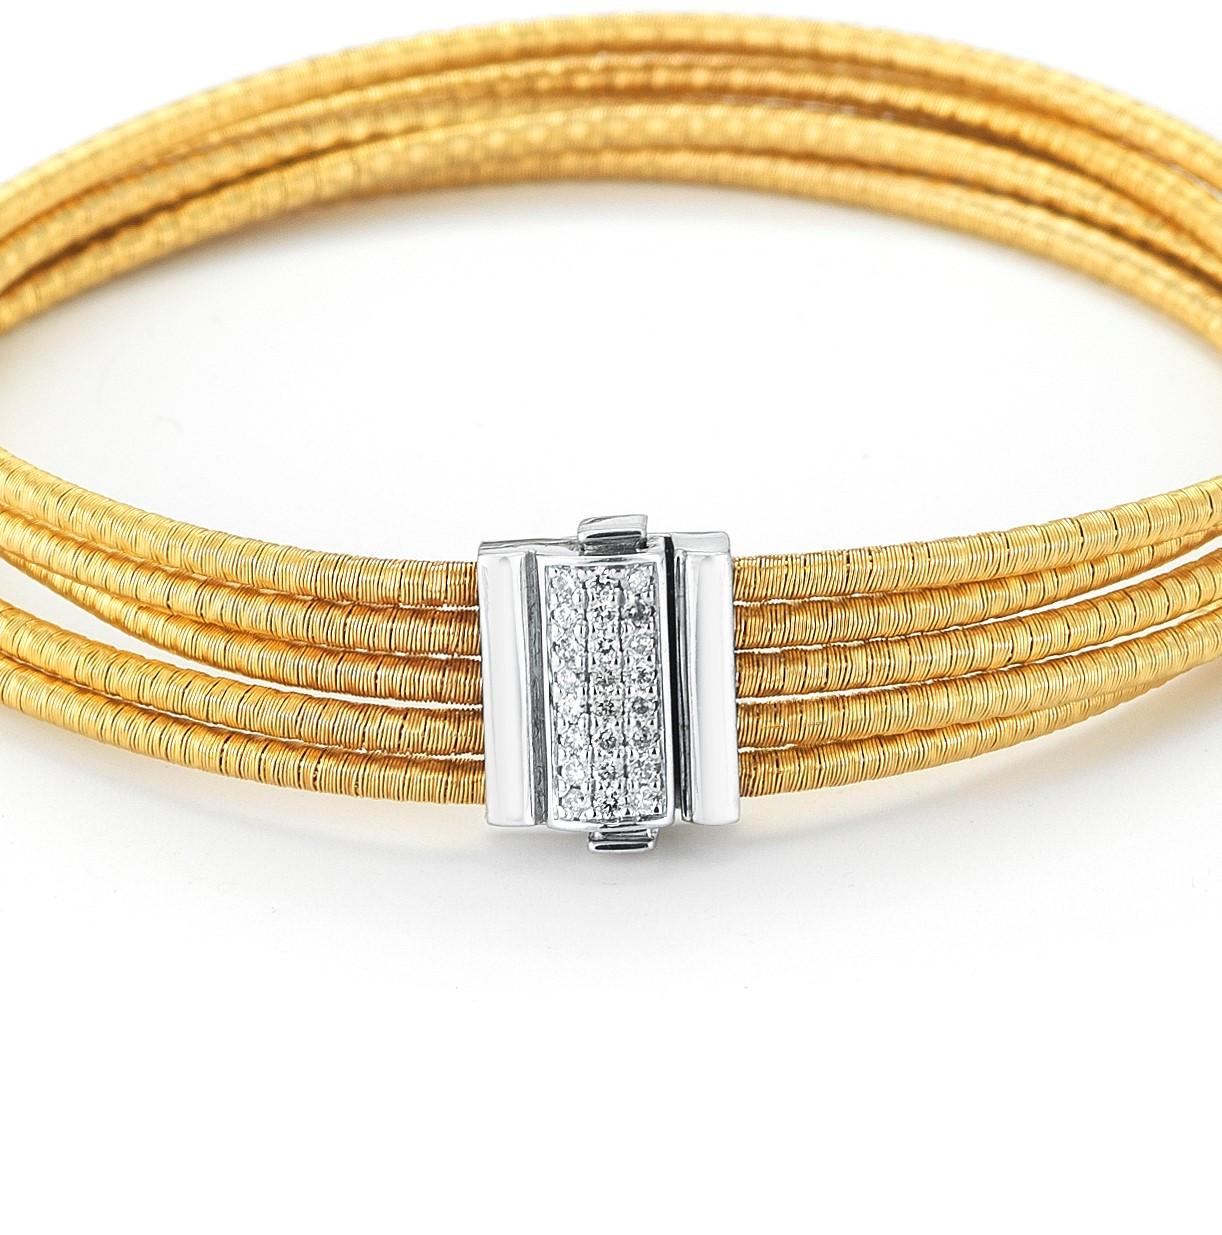 Hand-Crafted 14K Yellow Gold Multi-Strand Mesh Bracelet Accented with a Diamond  In New Condition For Sale In Great Neck, NY